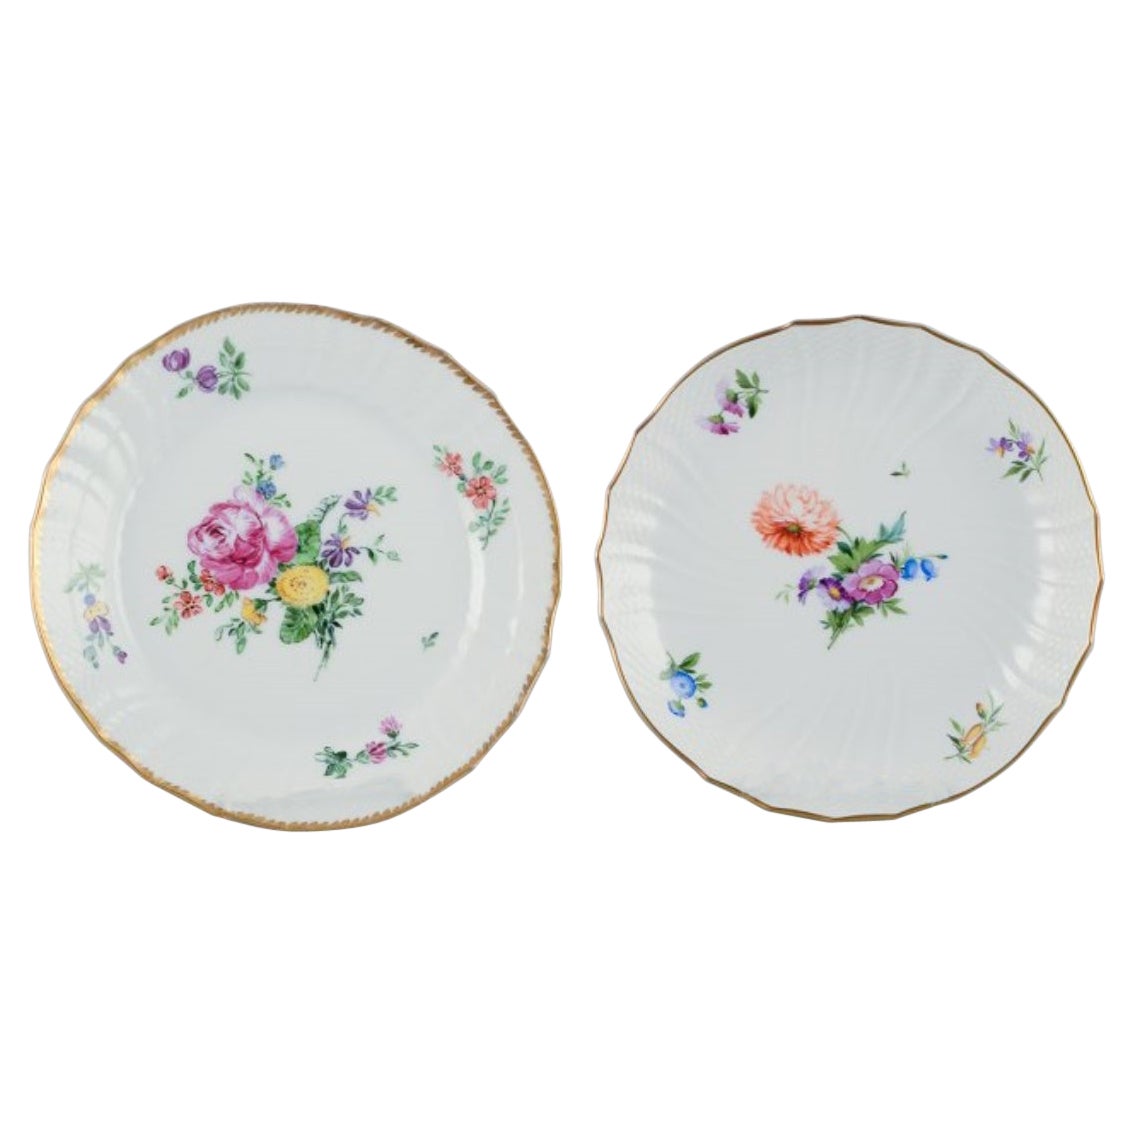 Royal Copenhagen, Saxon Flower, a plate and a low bowl with flowers